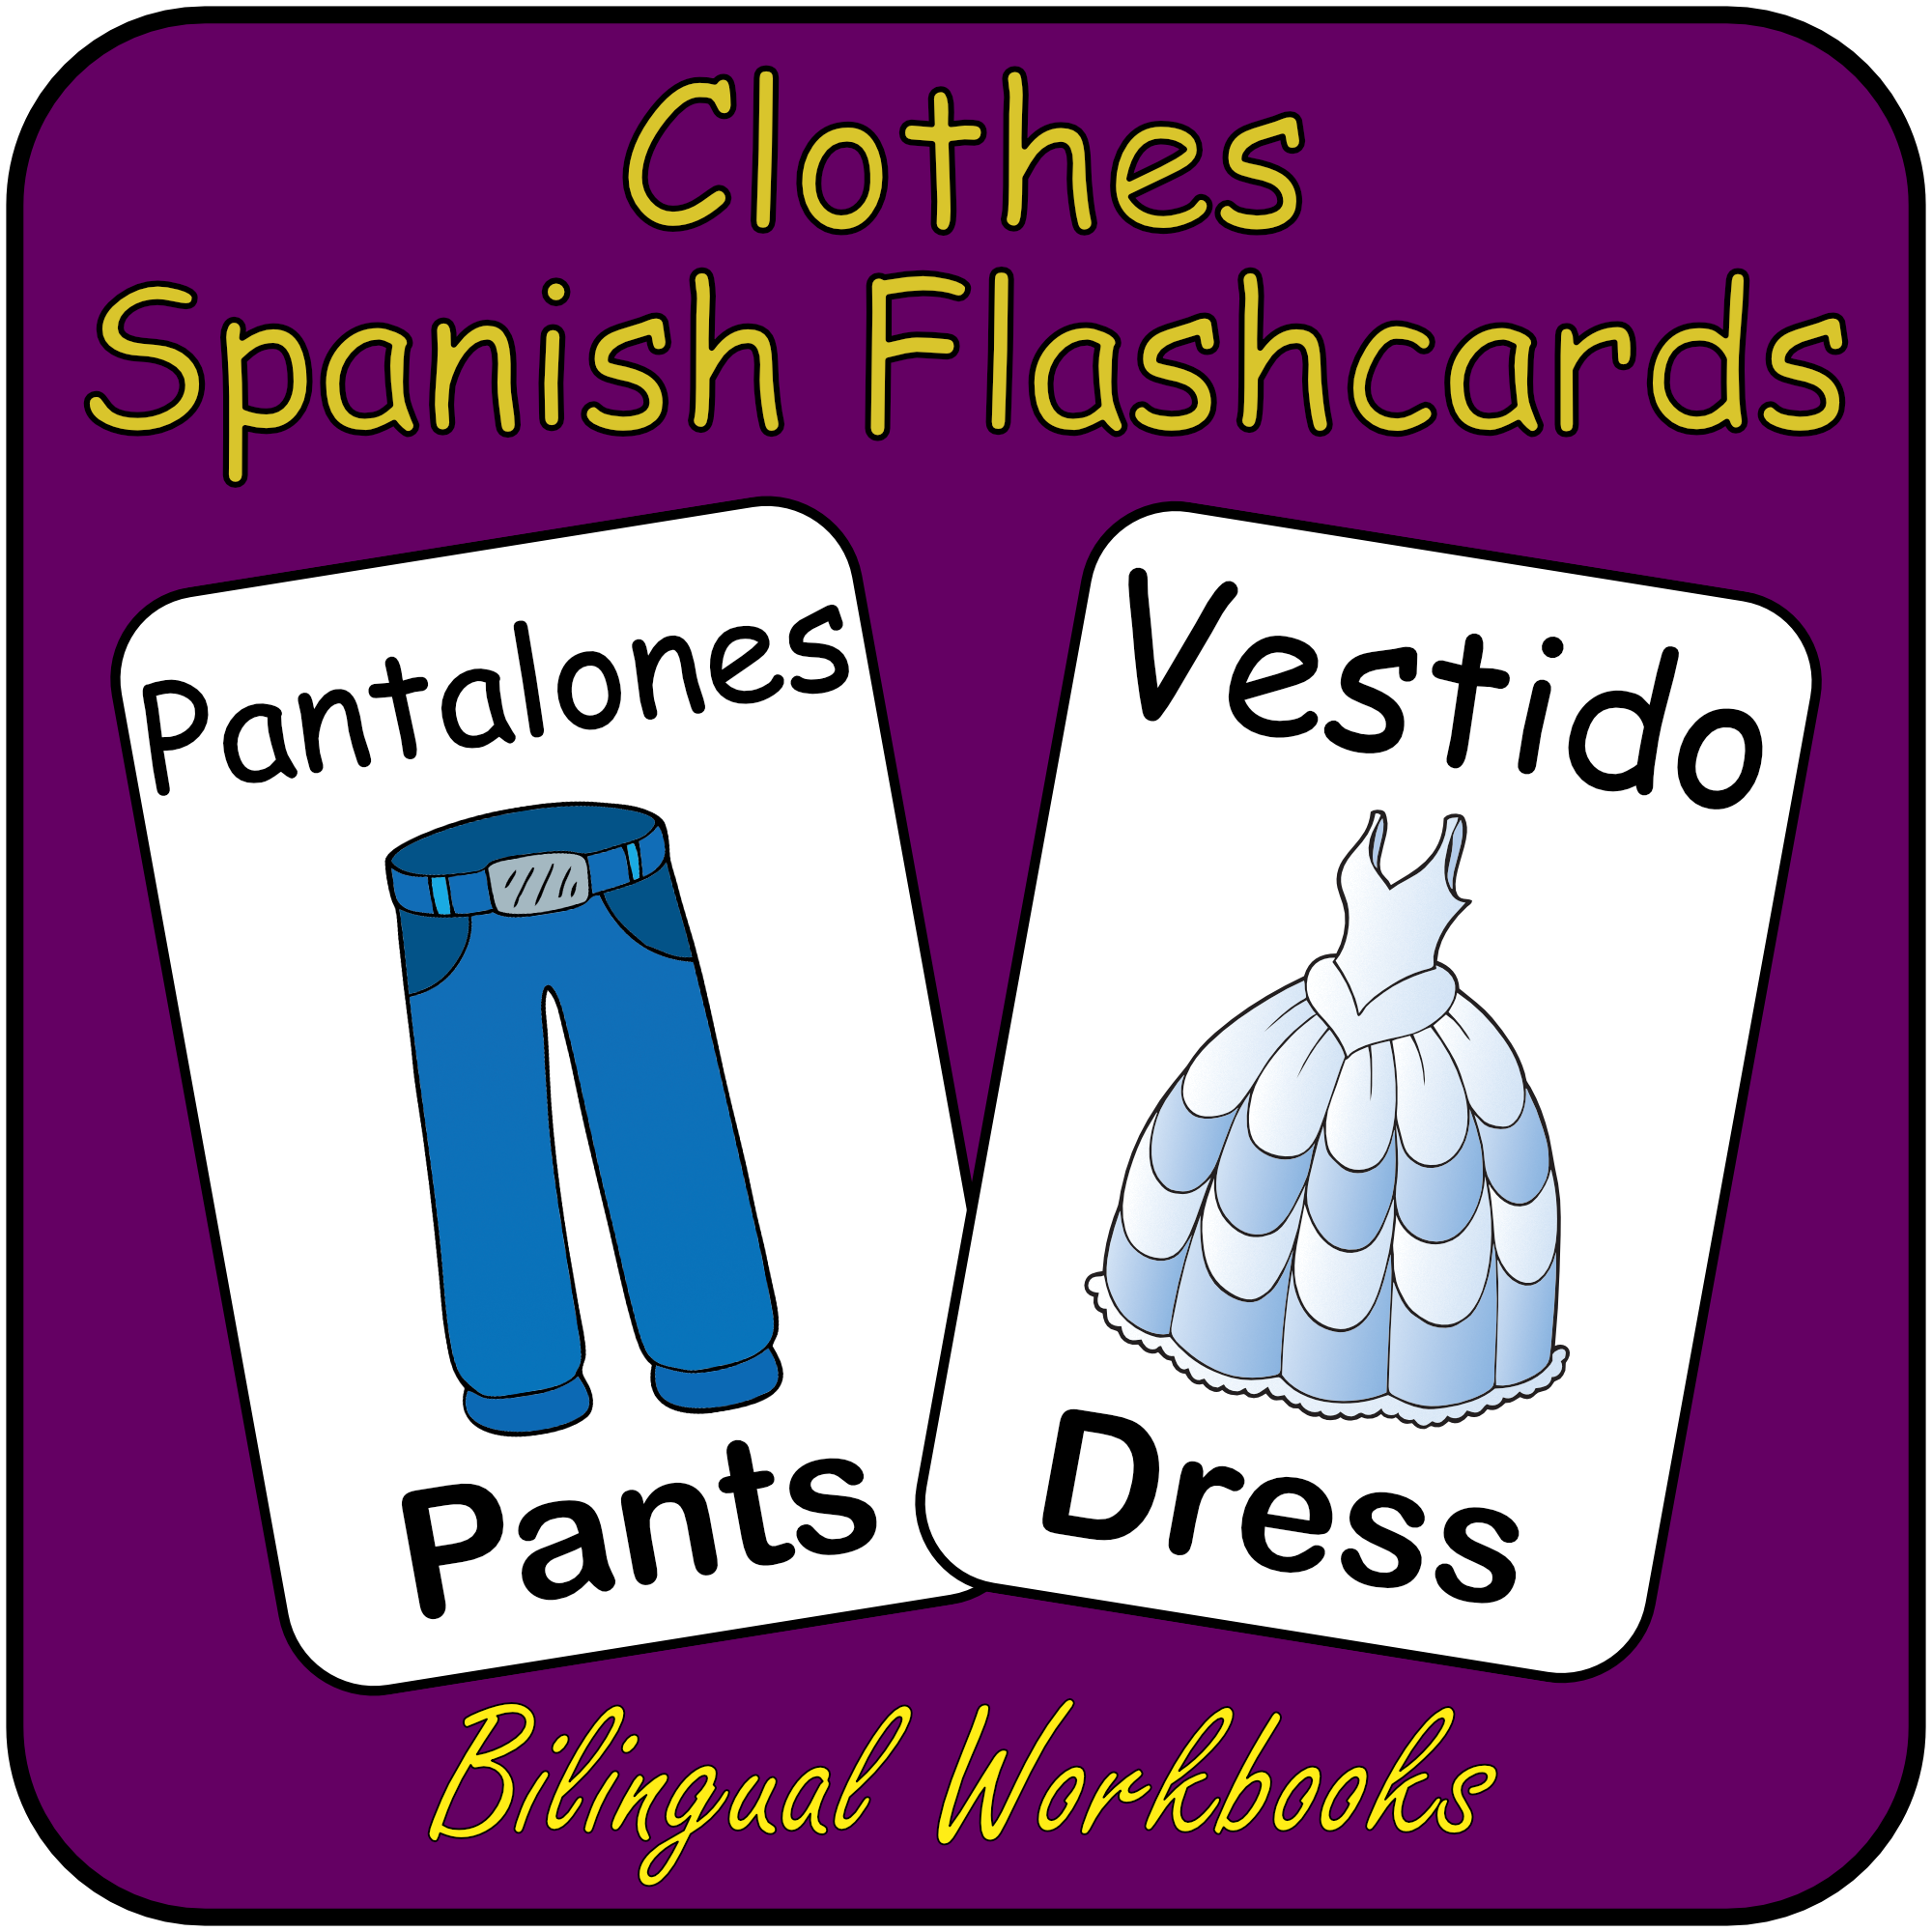 CLOTHES - Spanish Flash Cards - Vocabulary Study flashcards with English and Spanish - Learn or Teach Spanish